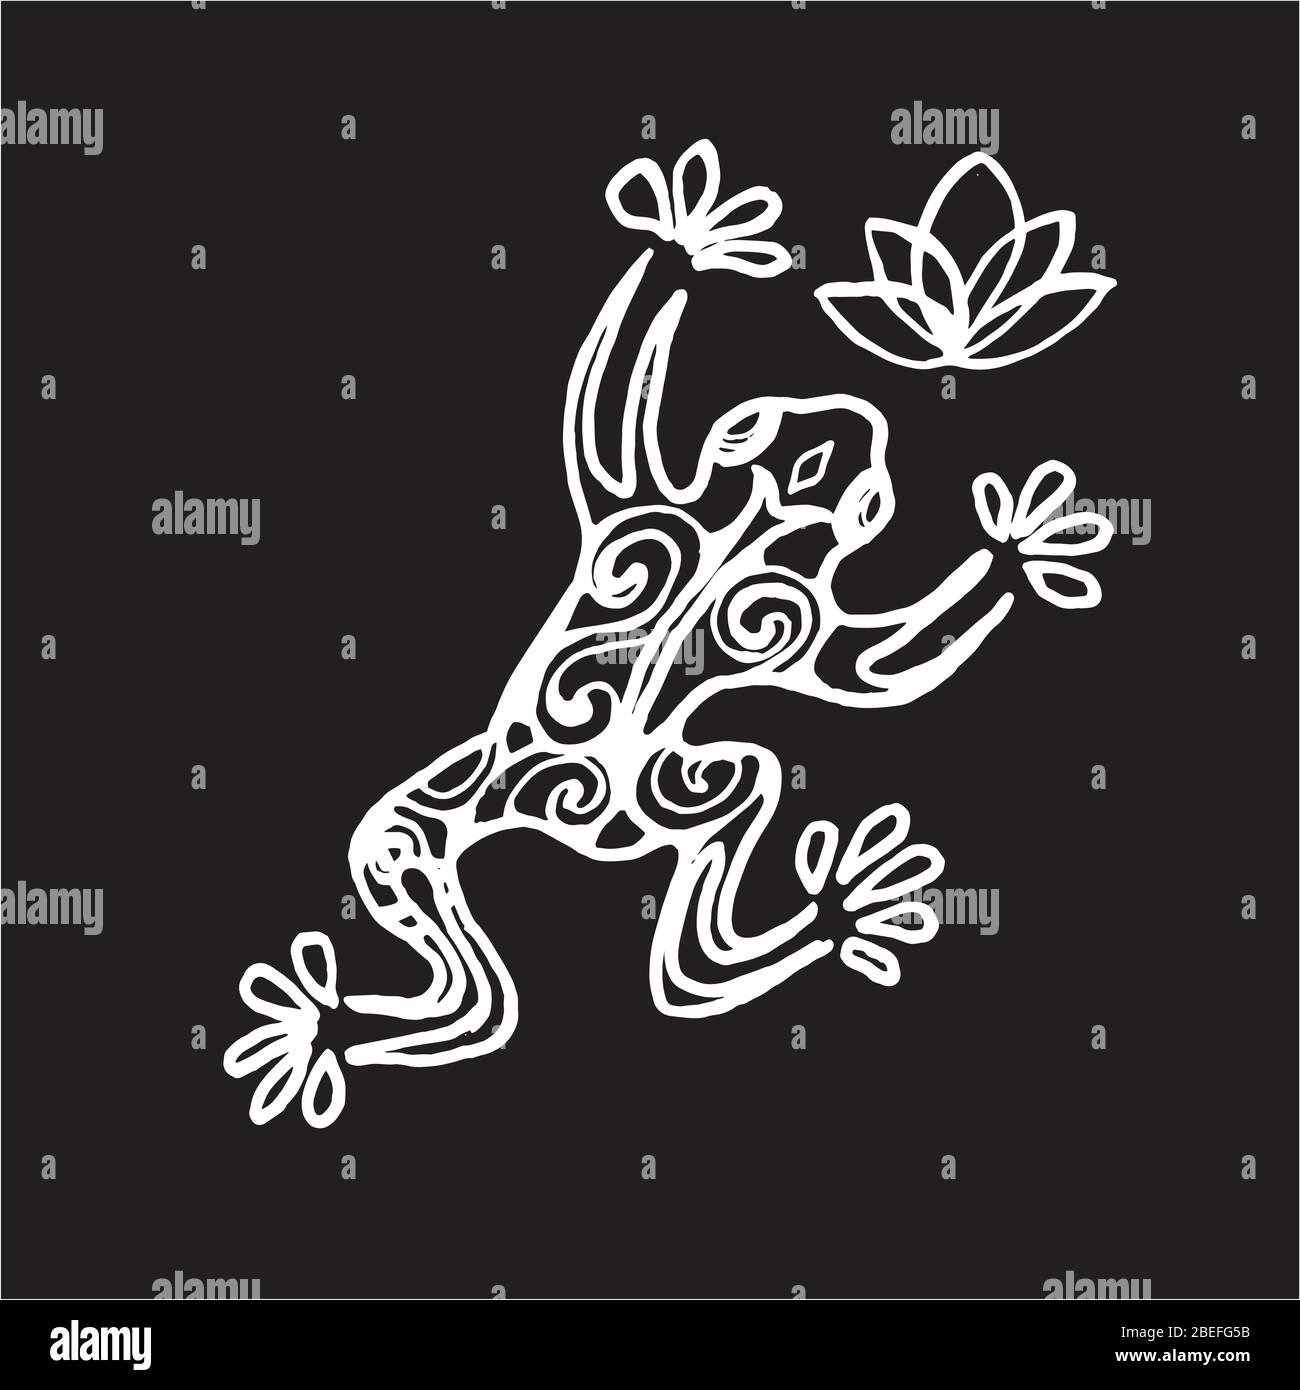 Illustration of a frog in a jump in ornamental style. Chalk on a blackboard. Stock Vector